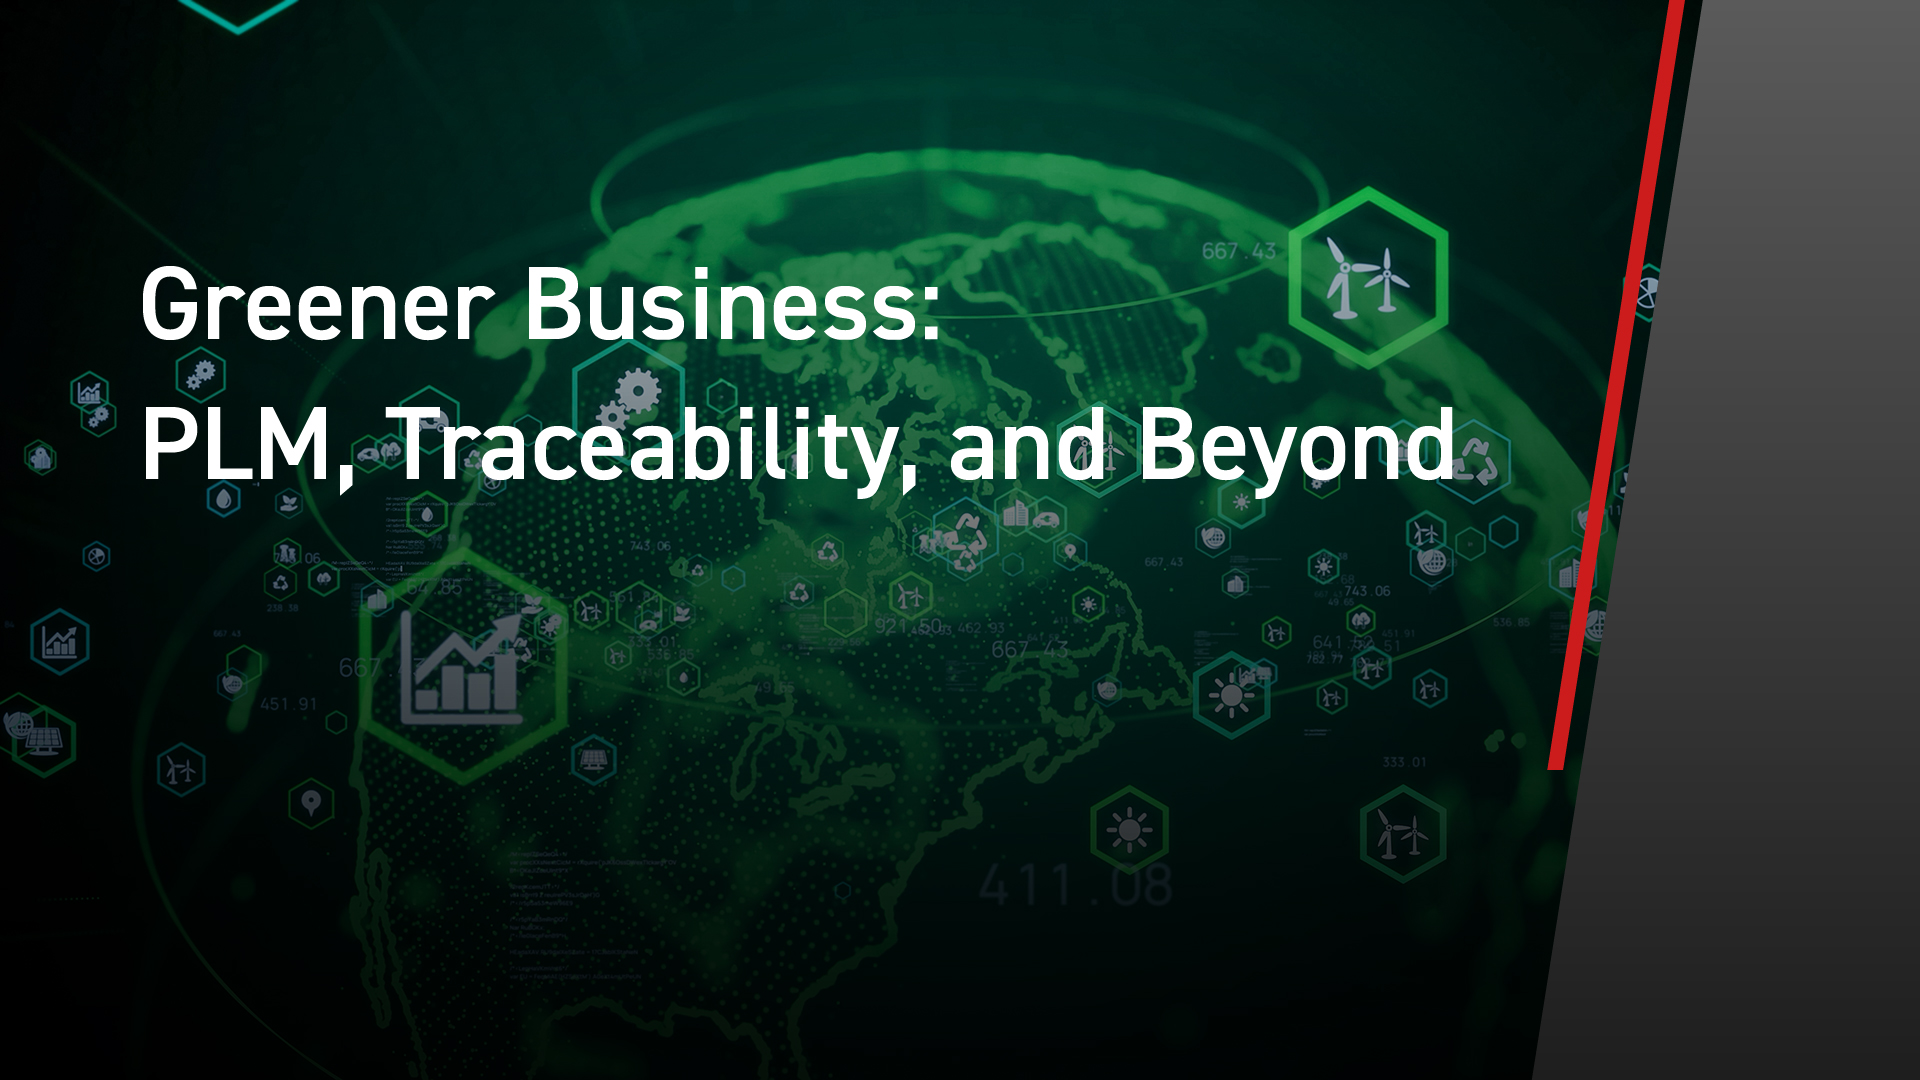 Greener Business: PLM, Traceability, and Beyond